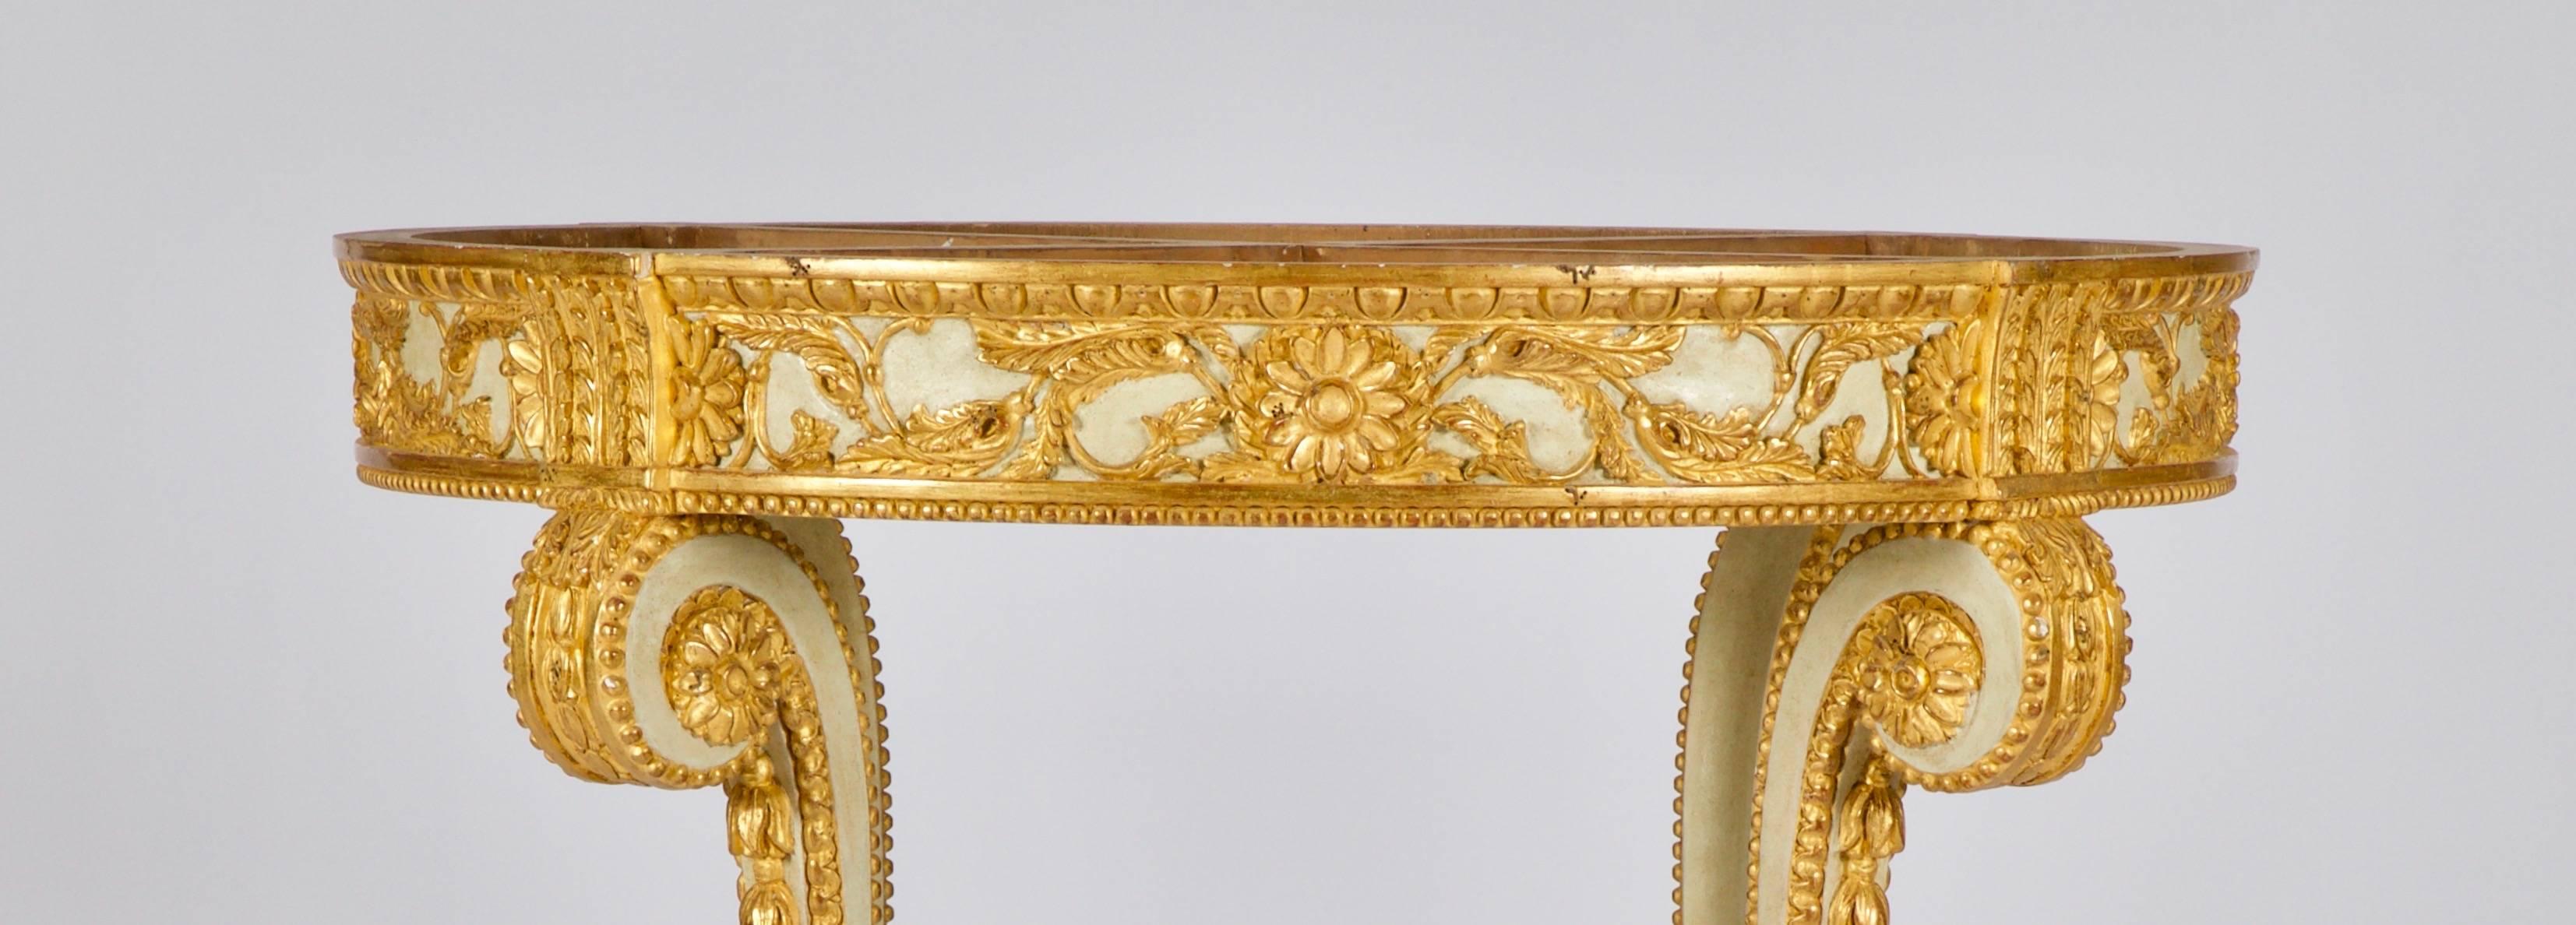 Contemporary Louis XVI Style Polychrome Console Table Reproduced by La Maison London